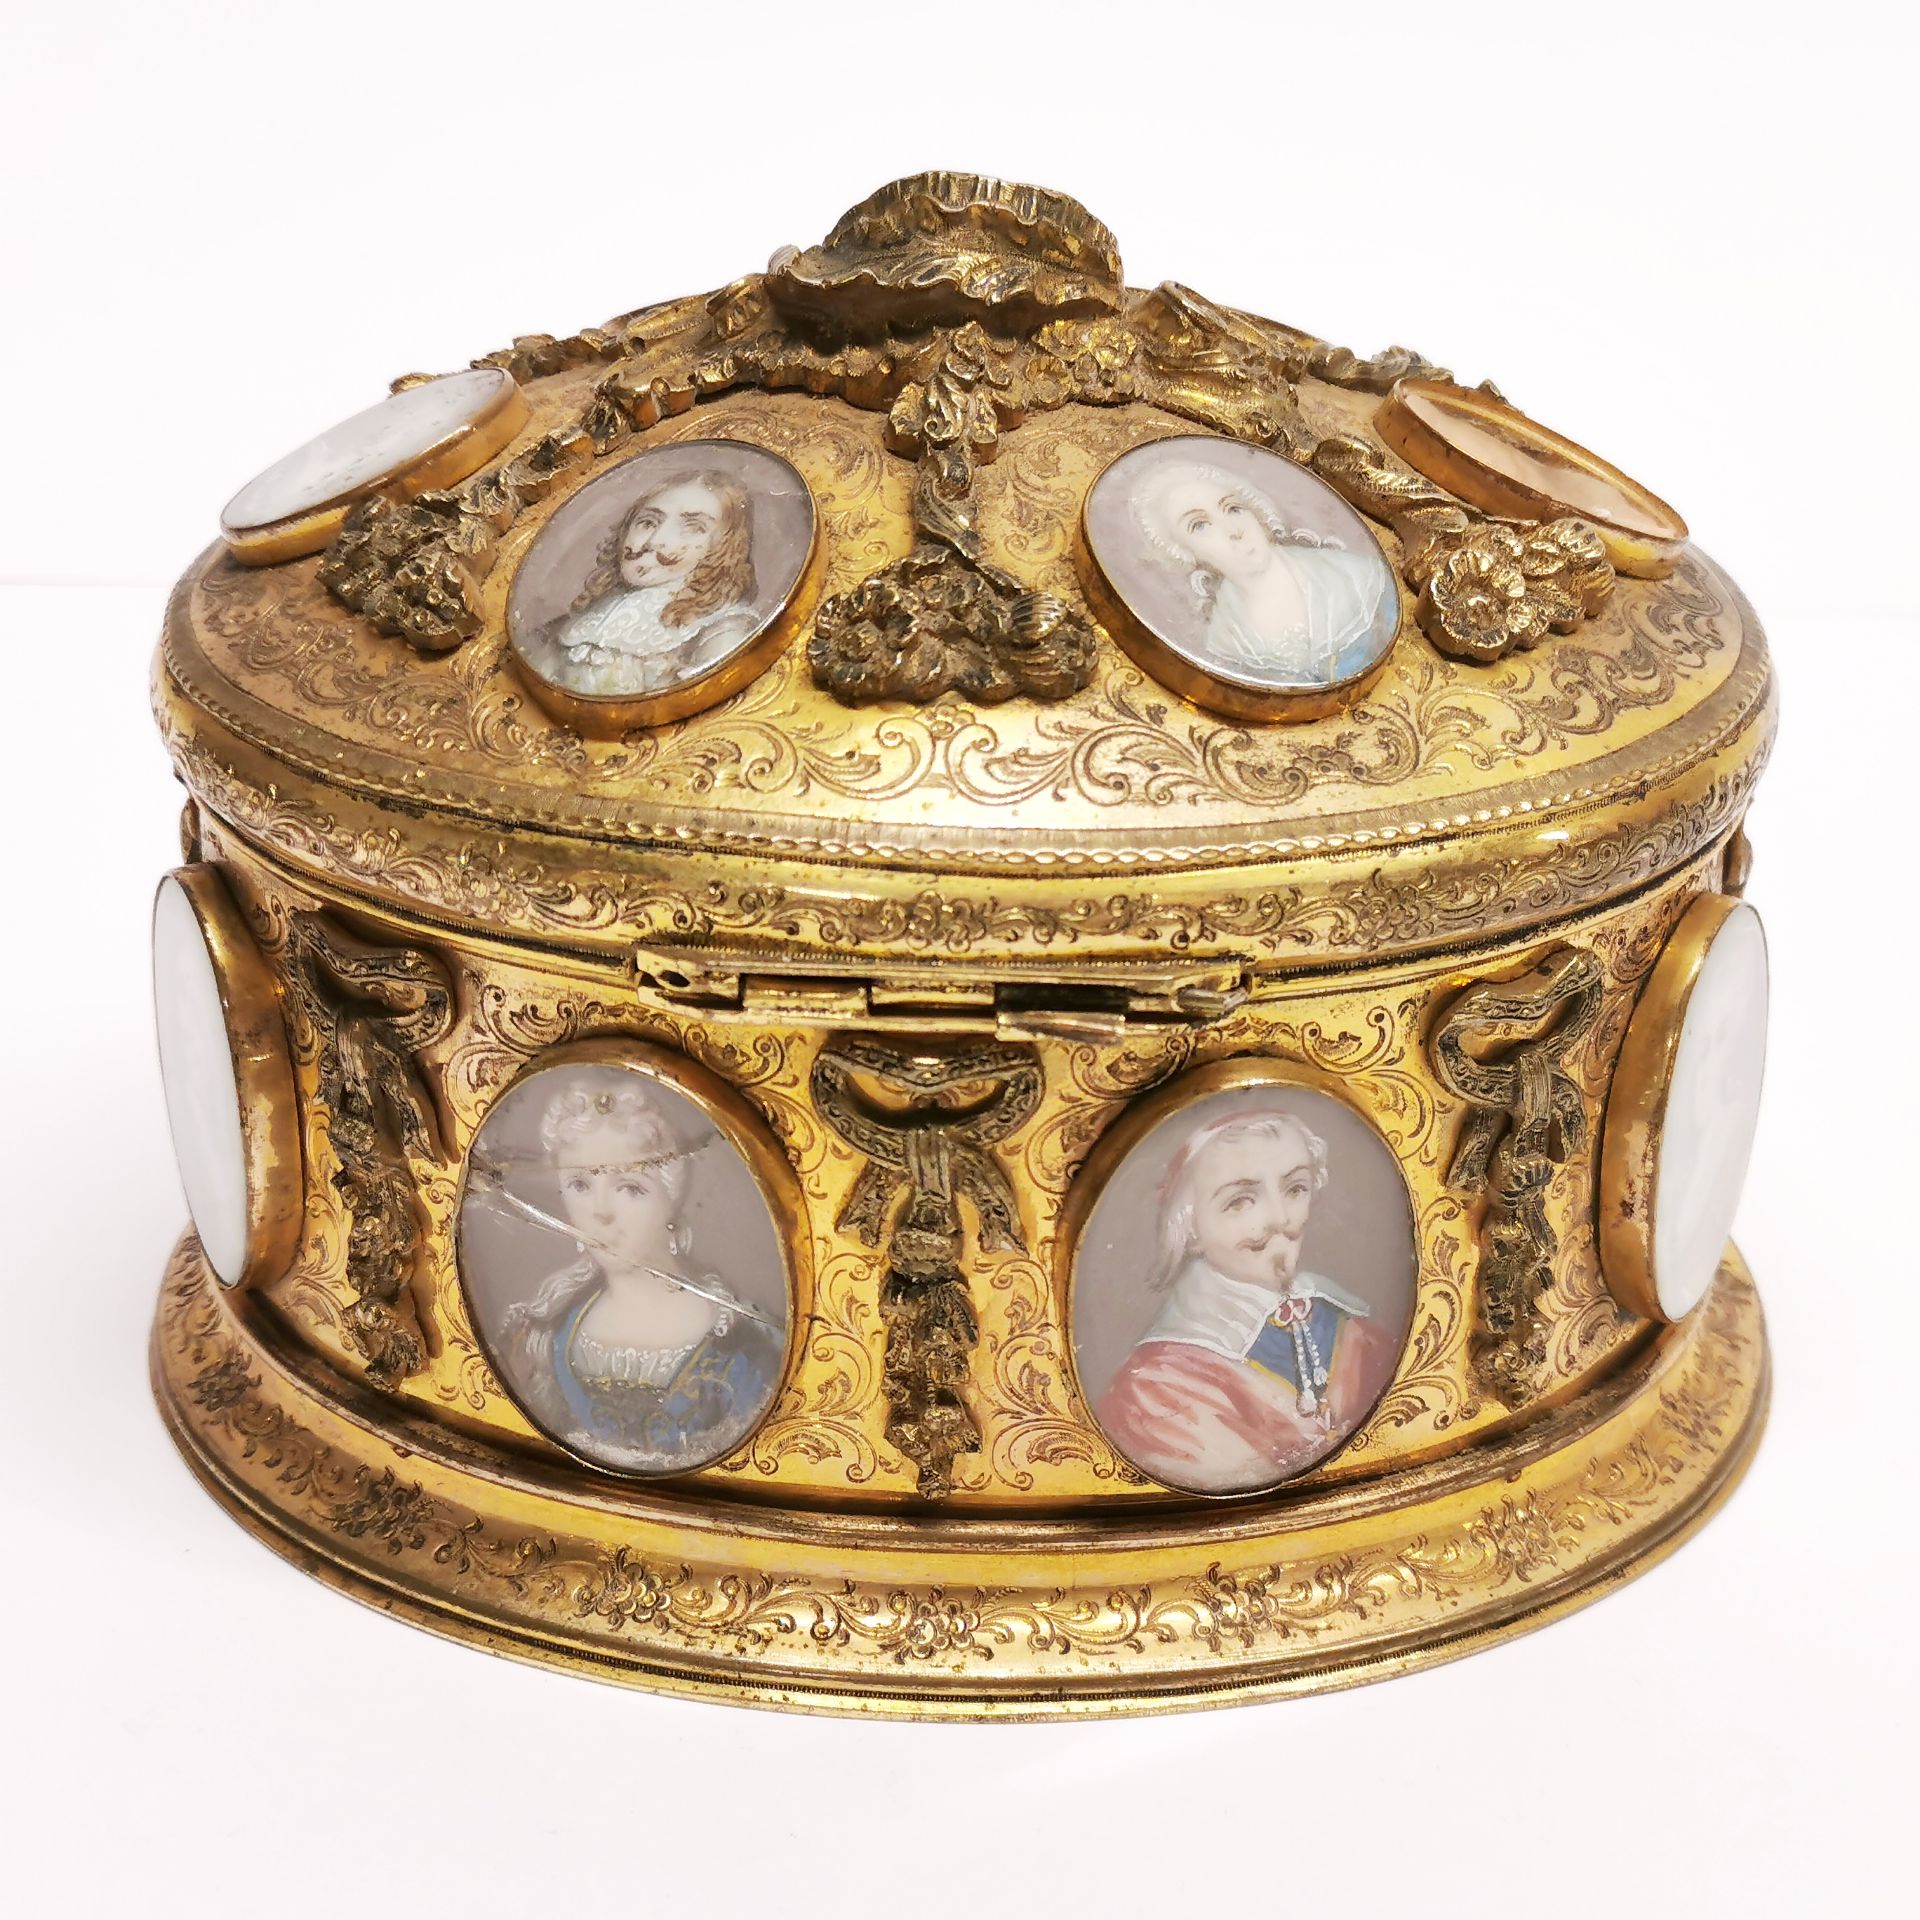 A superb 18thC French gilt casket embellished with hand painted portrait miniatures of courtiers, - Image 5 of 5